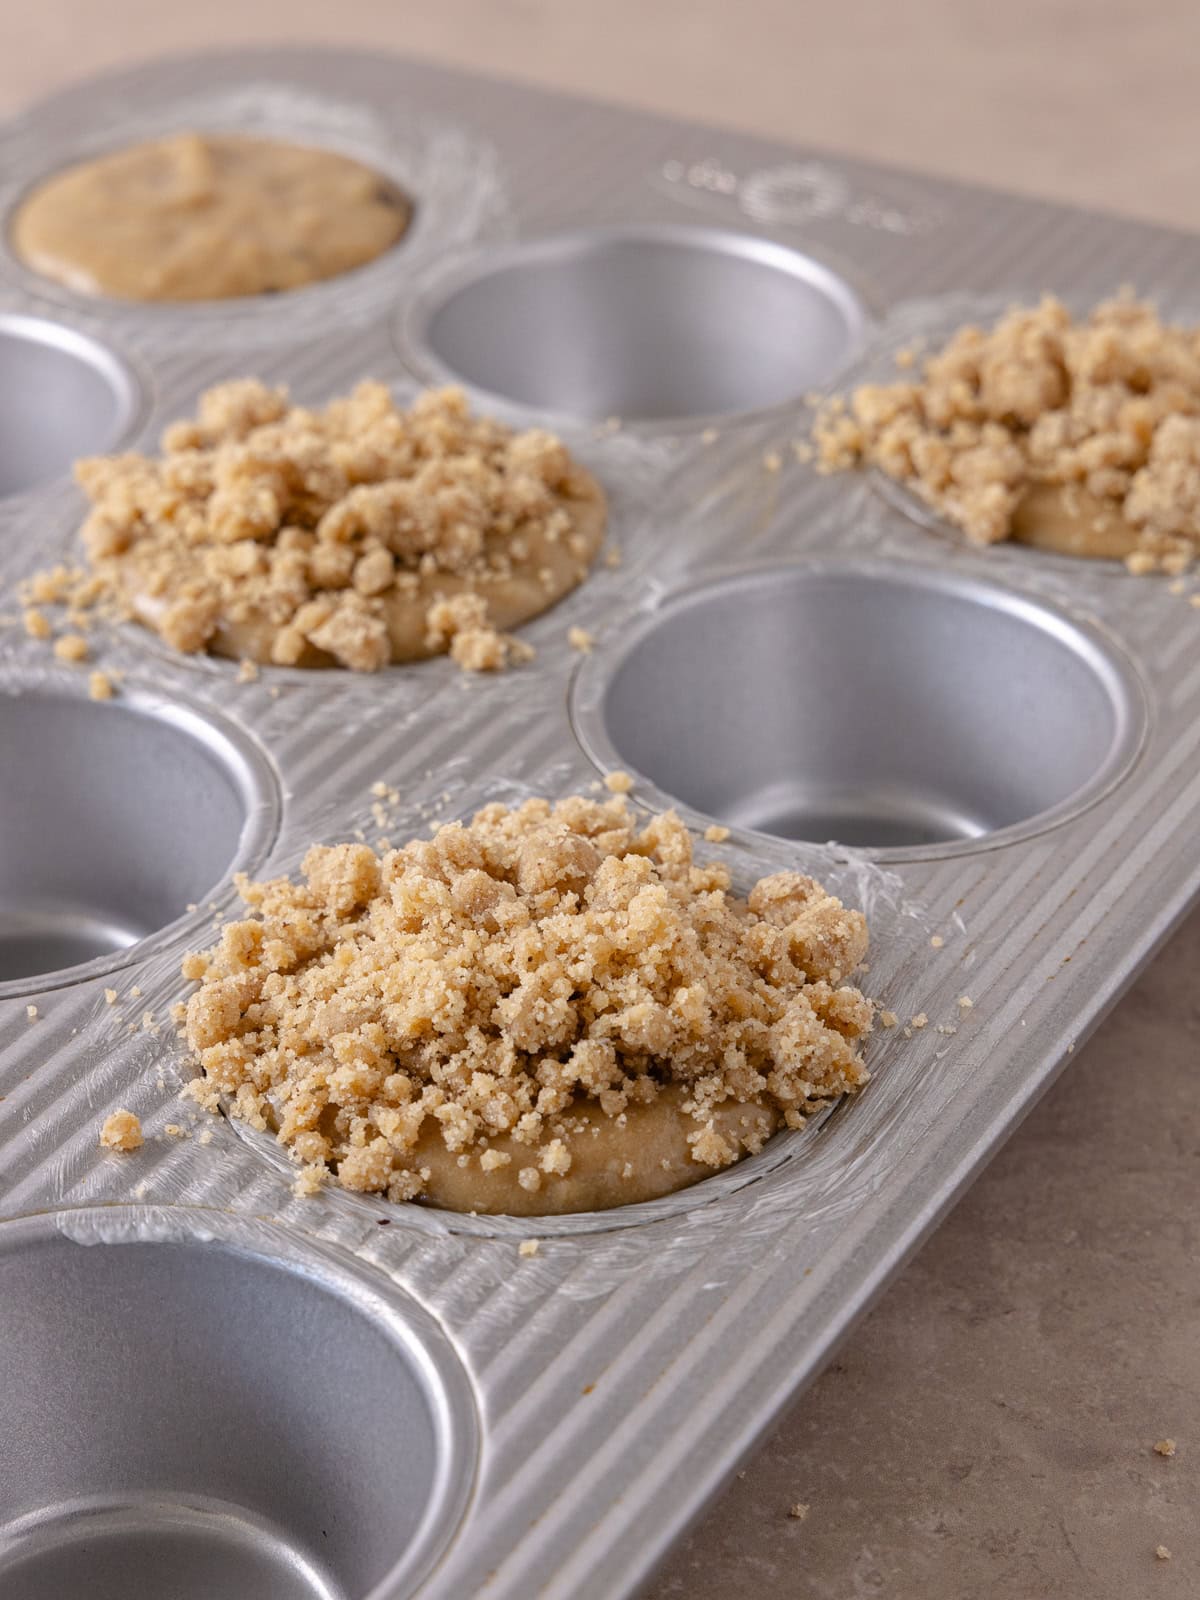 Muffin batter and streusel topping poured in every other cavity of a muffin pan and is now ready to bake.